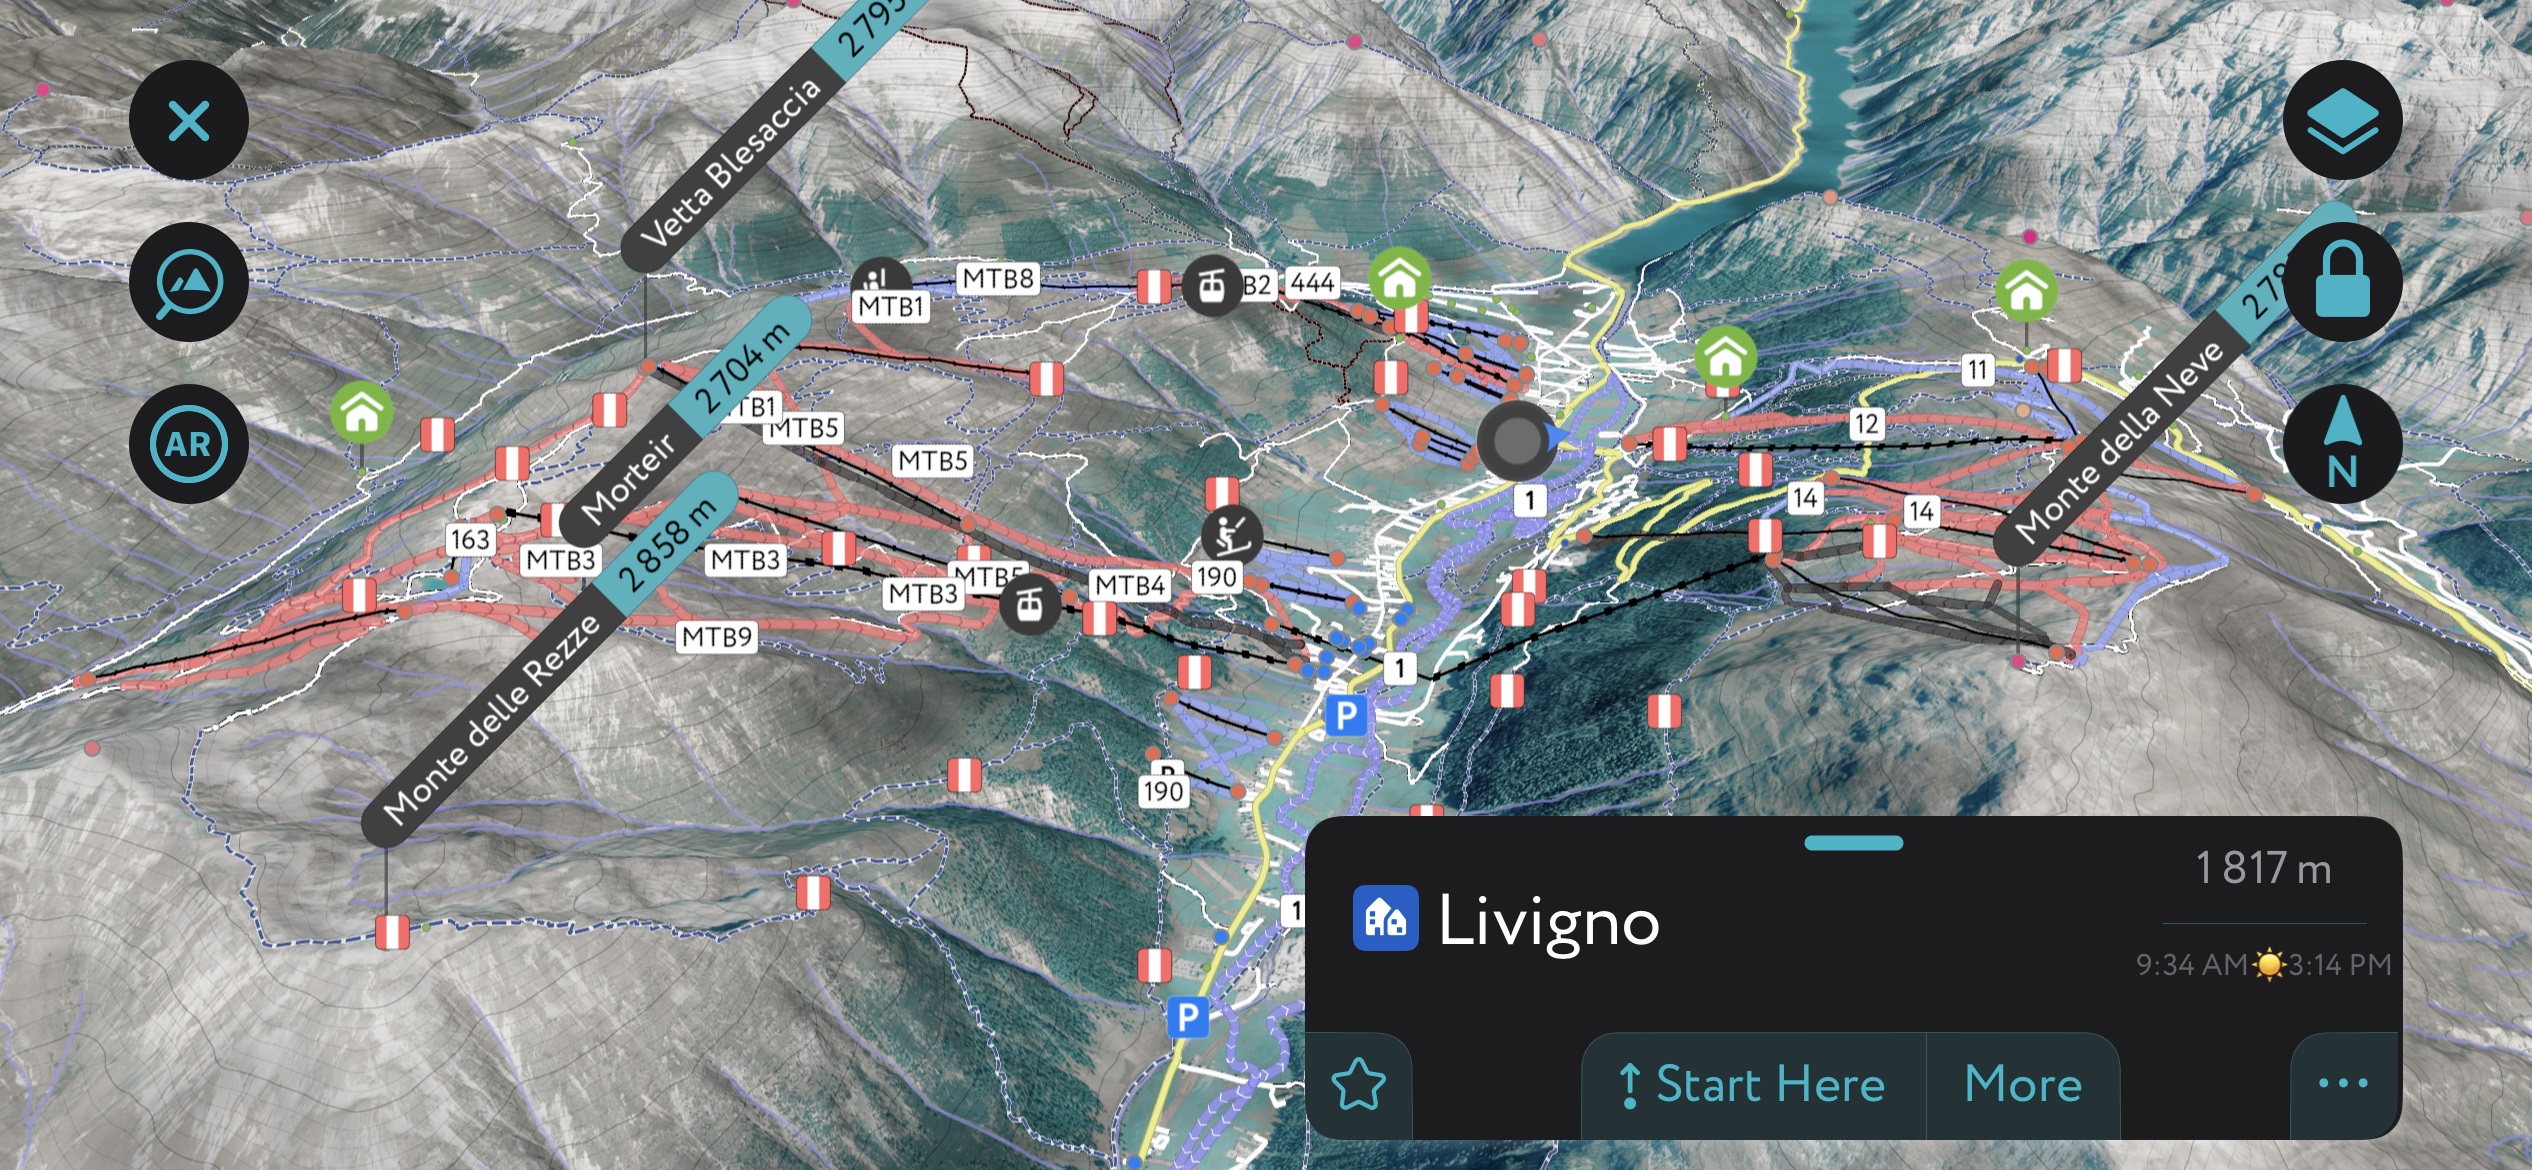 The Secrets to Finding the Best Snow Off-Piste.
             Using PeakVisor’s maps can help save time; infrastructure, such as lifts and parking lots, is clearly indicated. Many lifts now have schedules available on the app. 